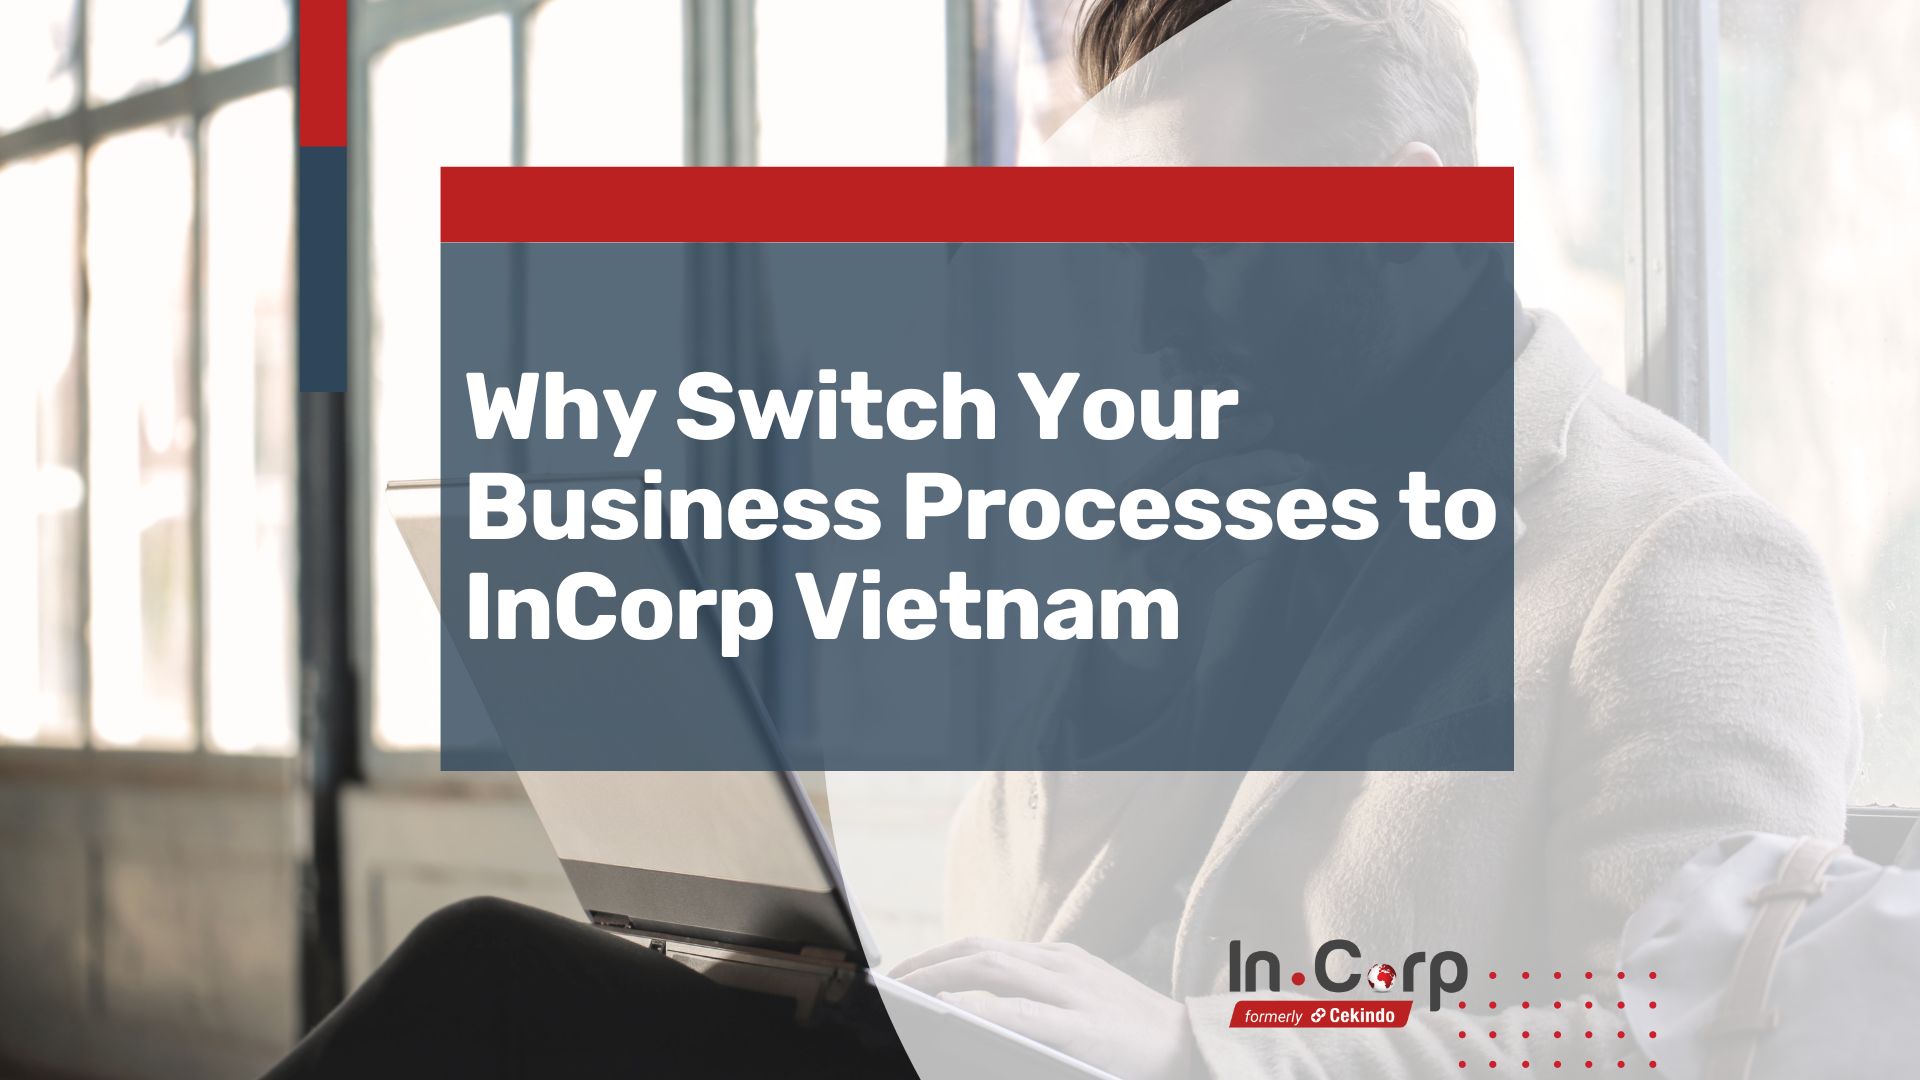 Switch to InCorp Vietnam for your Business Process Outsourcing